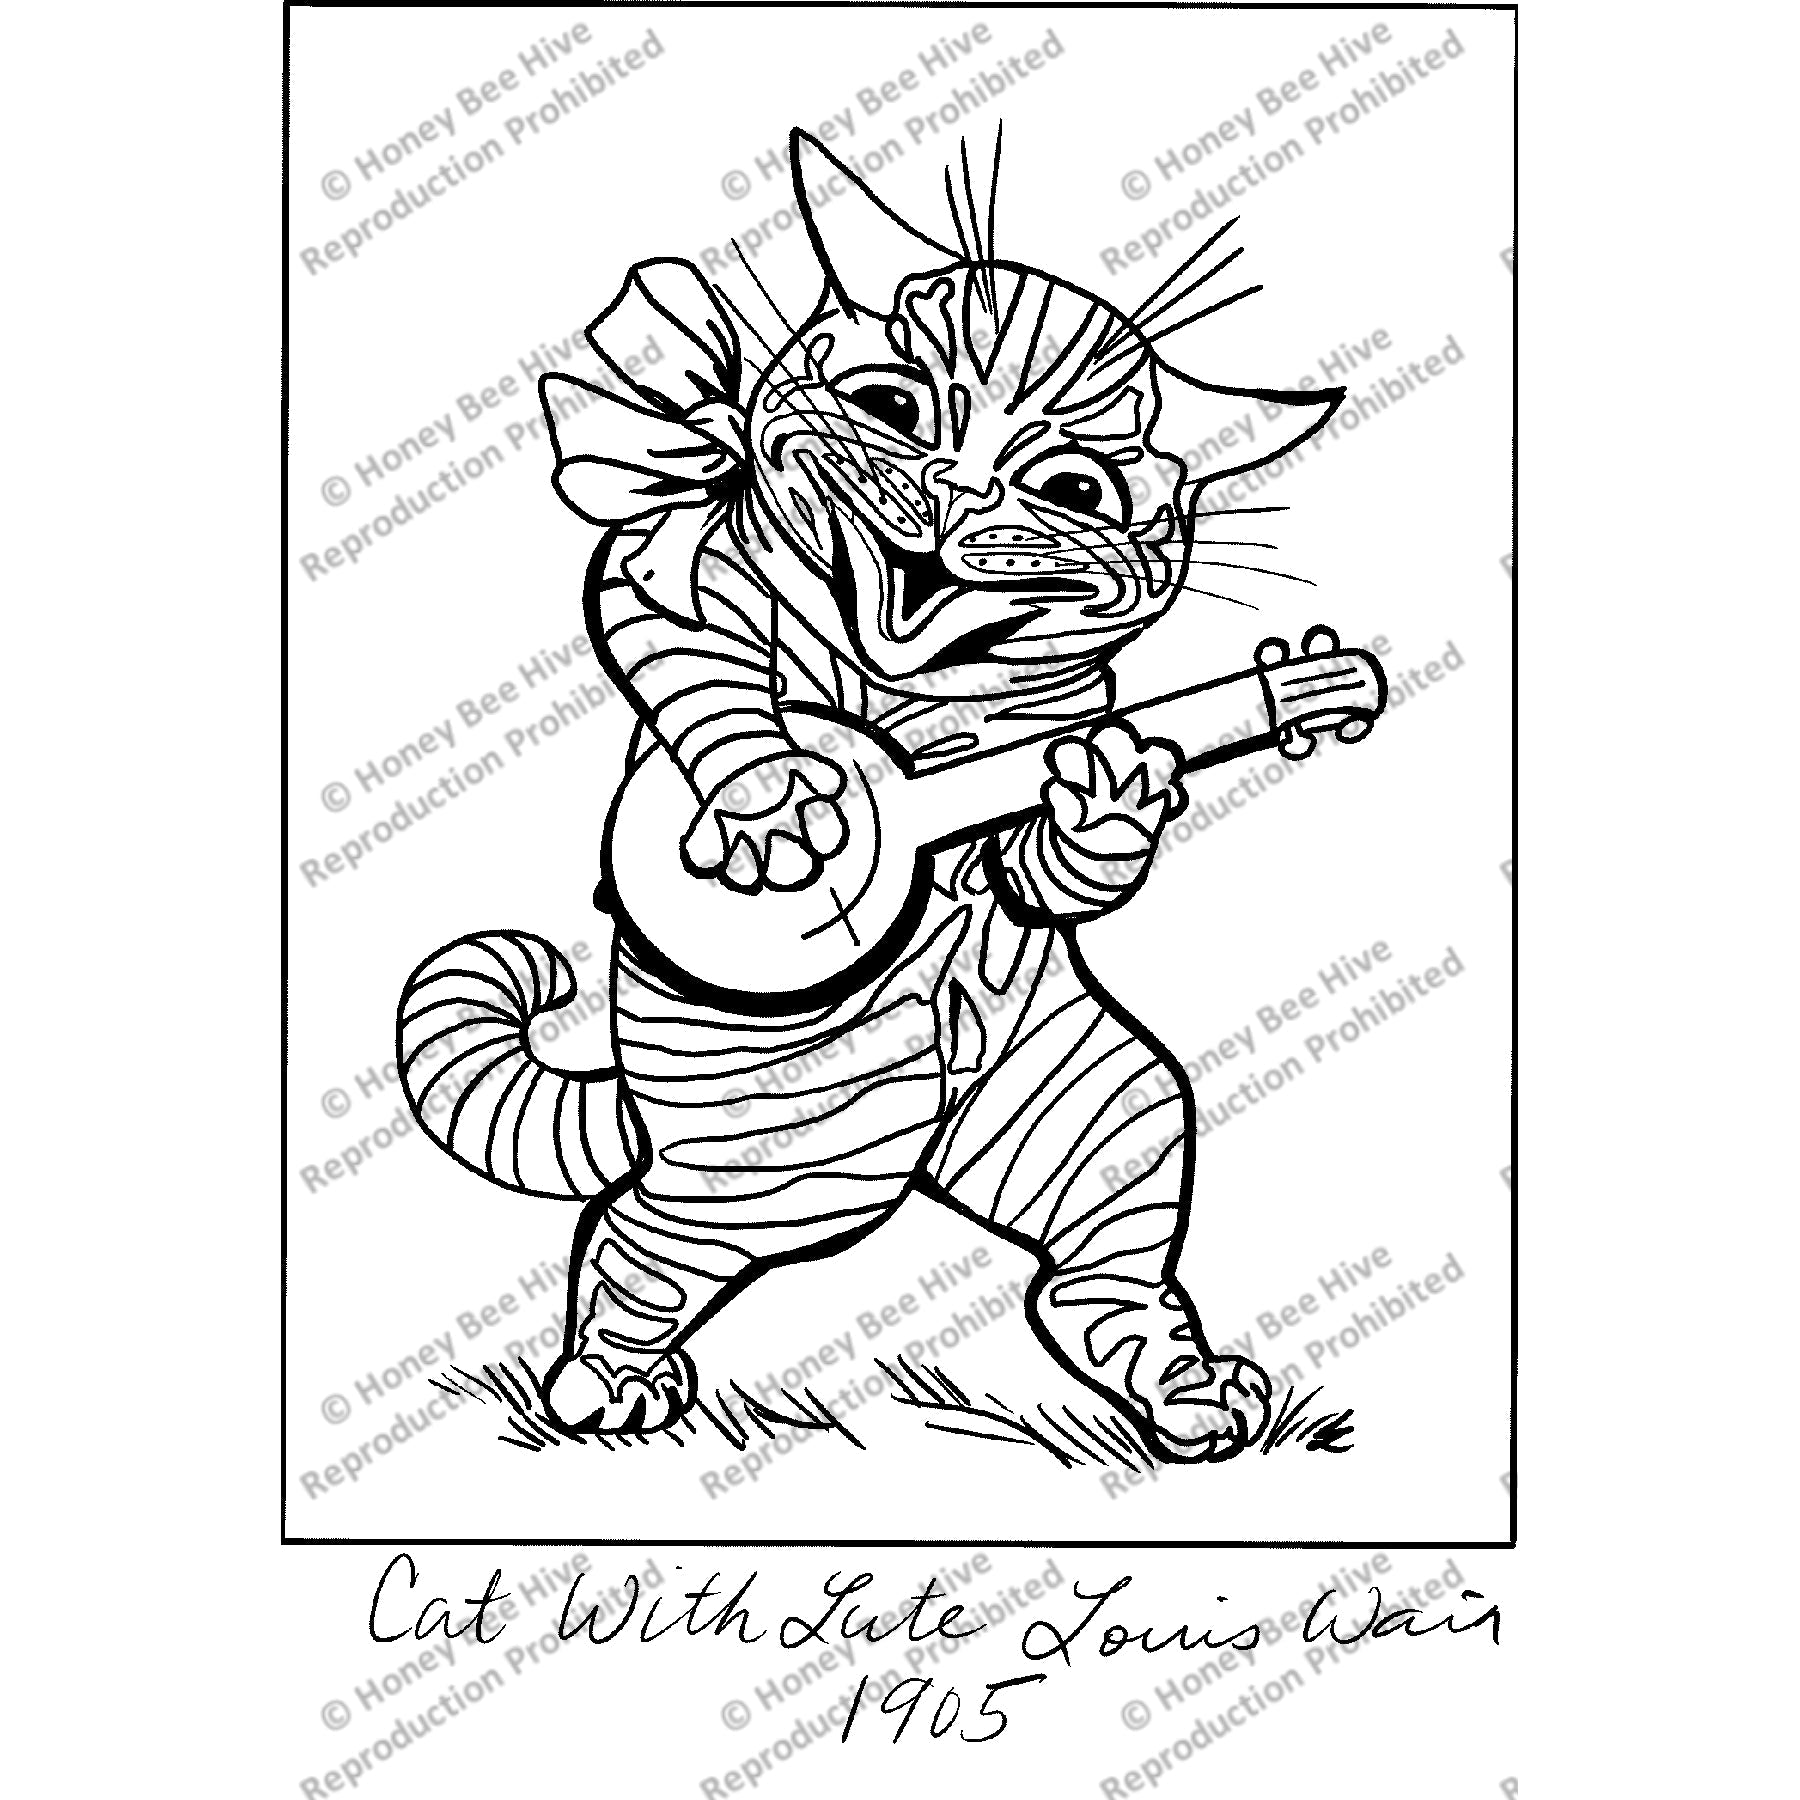 Cat with Banjo by Louis Wain, 1905, rug hooking pattern